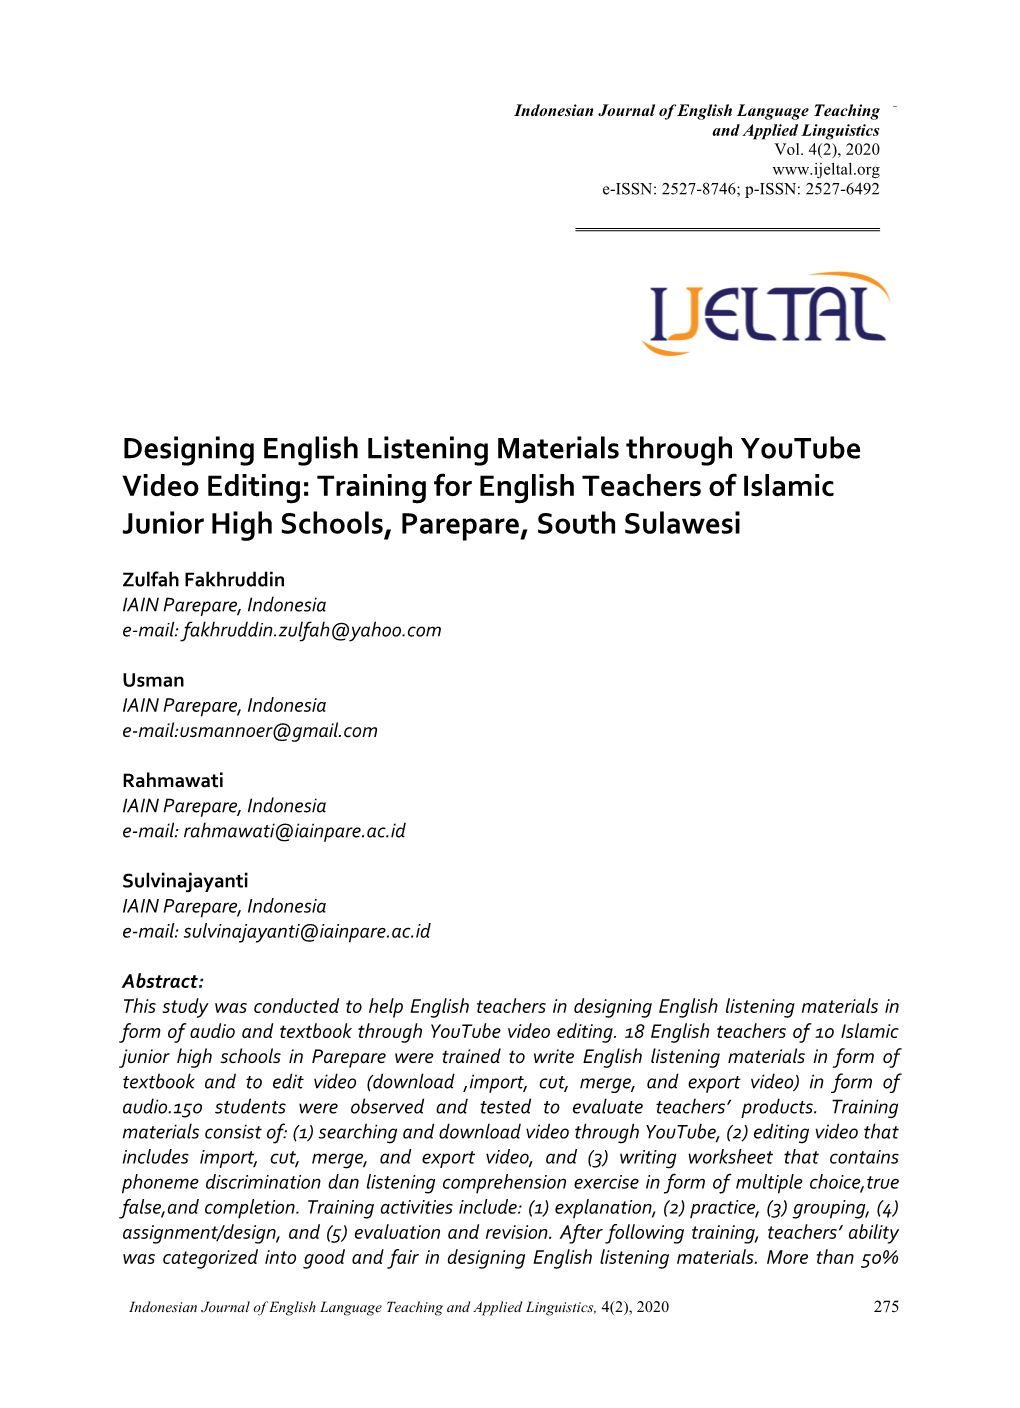 Designing English Listening Materials Through Youtube Video Editing Indonesian Journal of English Language Teaching and Applied Linguistics Vol